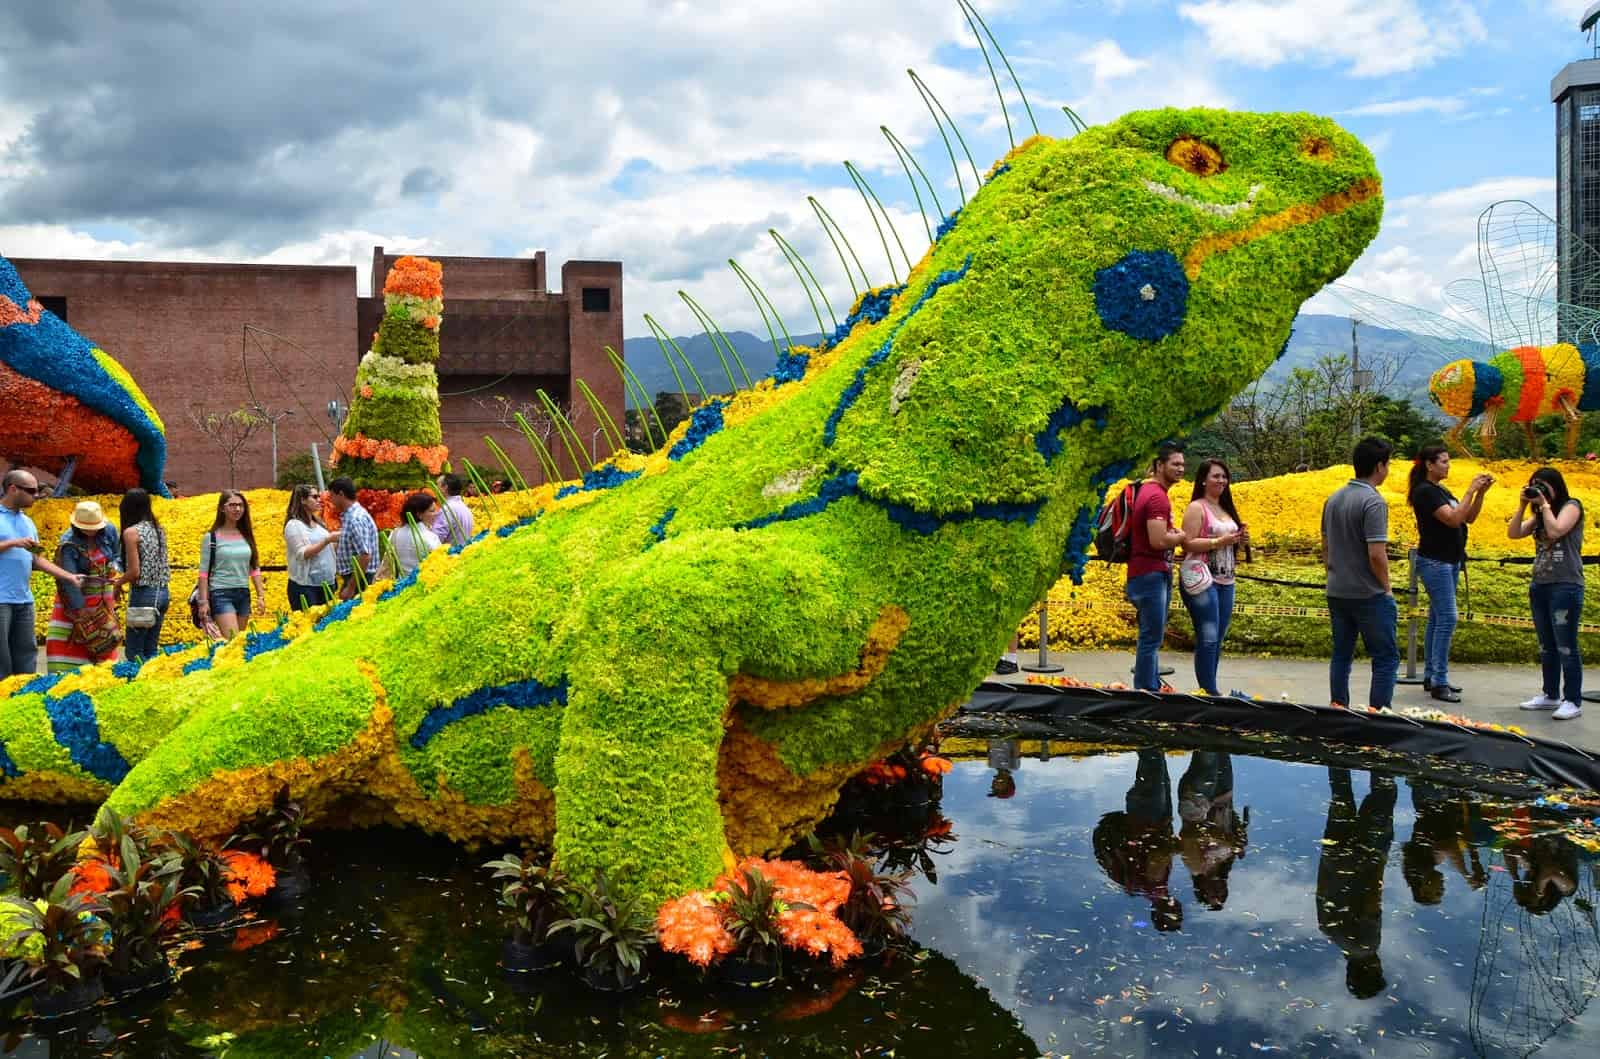 Iguana at Plaza Mayor in the Flower Festival, Medellín, Antioquia, Colombia